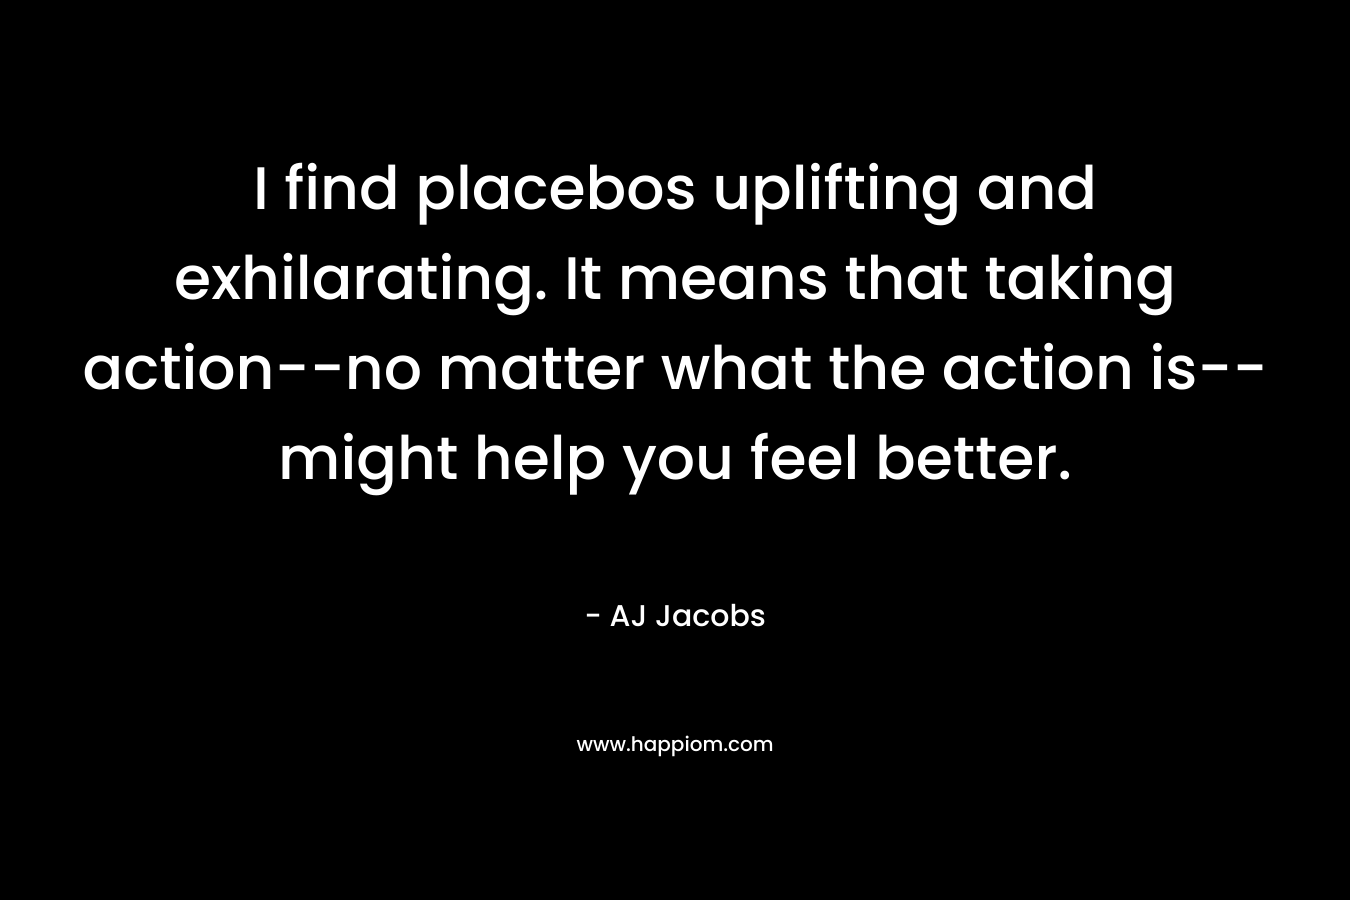 I find placebos uplifting and exhilarating. It means that taking action--no matter what the action is--might help you feel better.